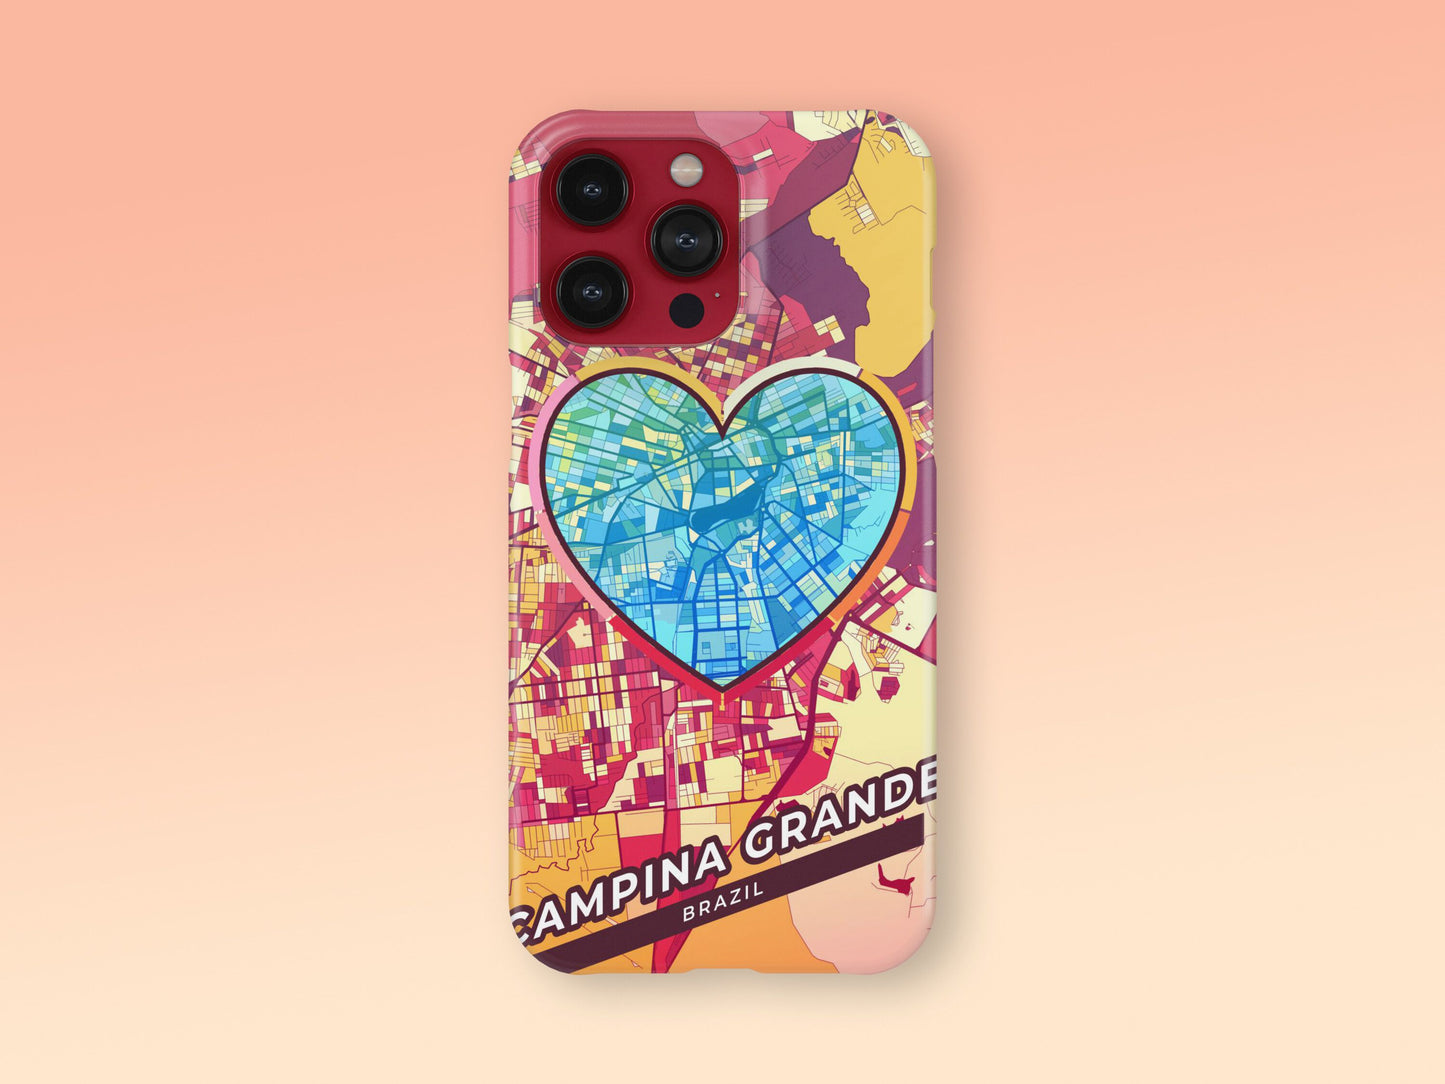 Campina Grande Brazil slim phone case with colorful icon. Birthday, wedding or housewarming gift. Couple match cases. 2